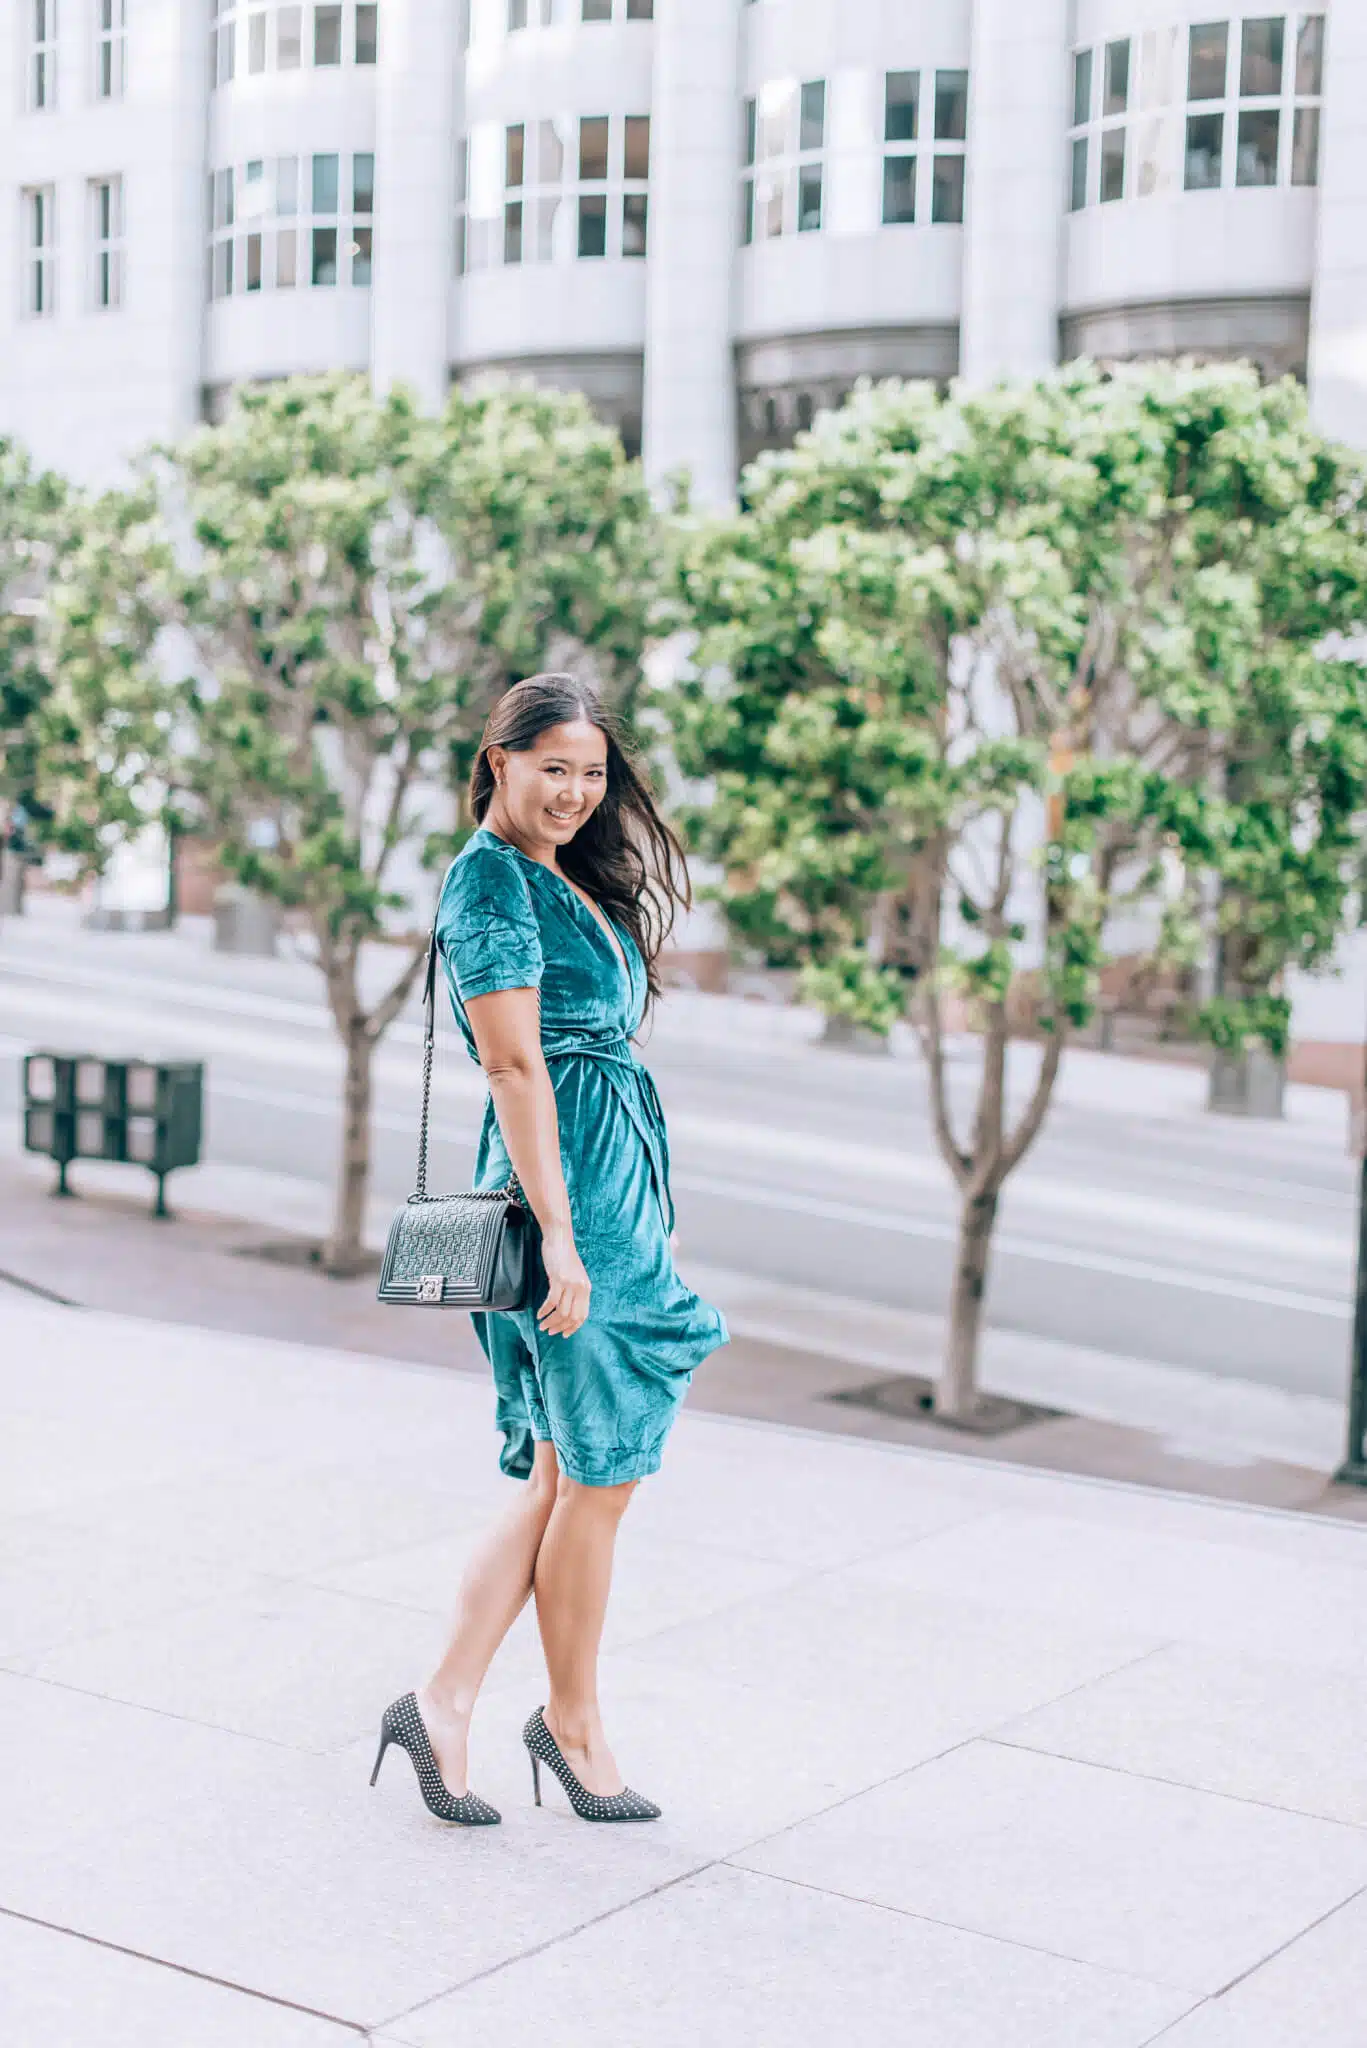 In love with the Coco: Bag Borrow or Steal Review featured by popular San Francisco fashion blogger, WTFab